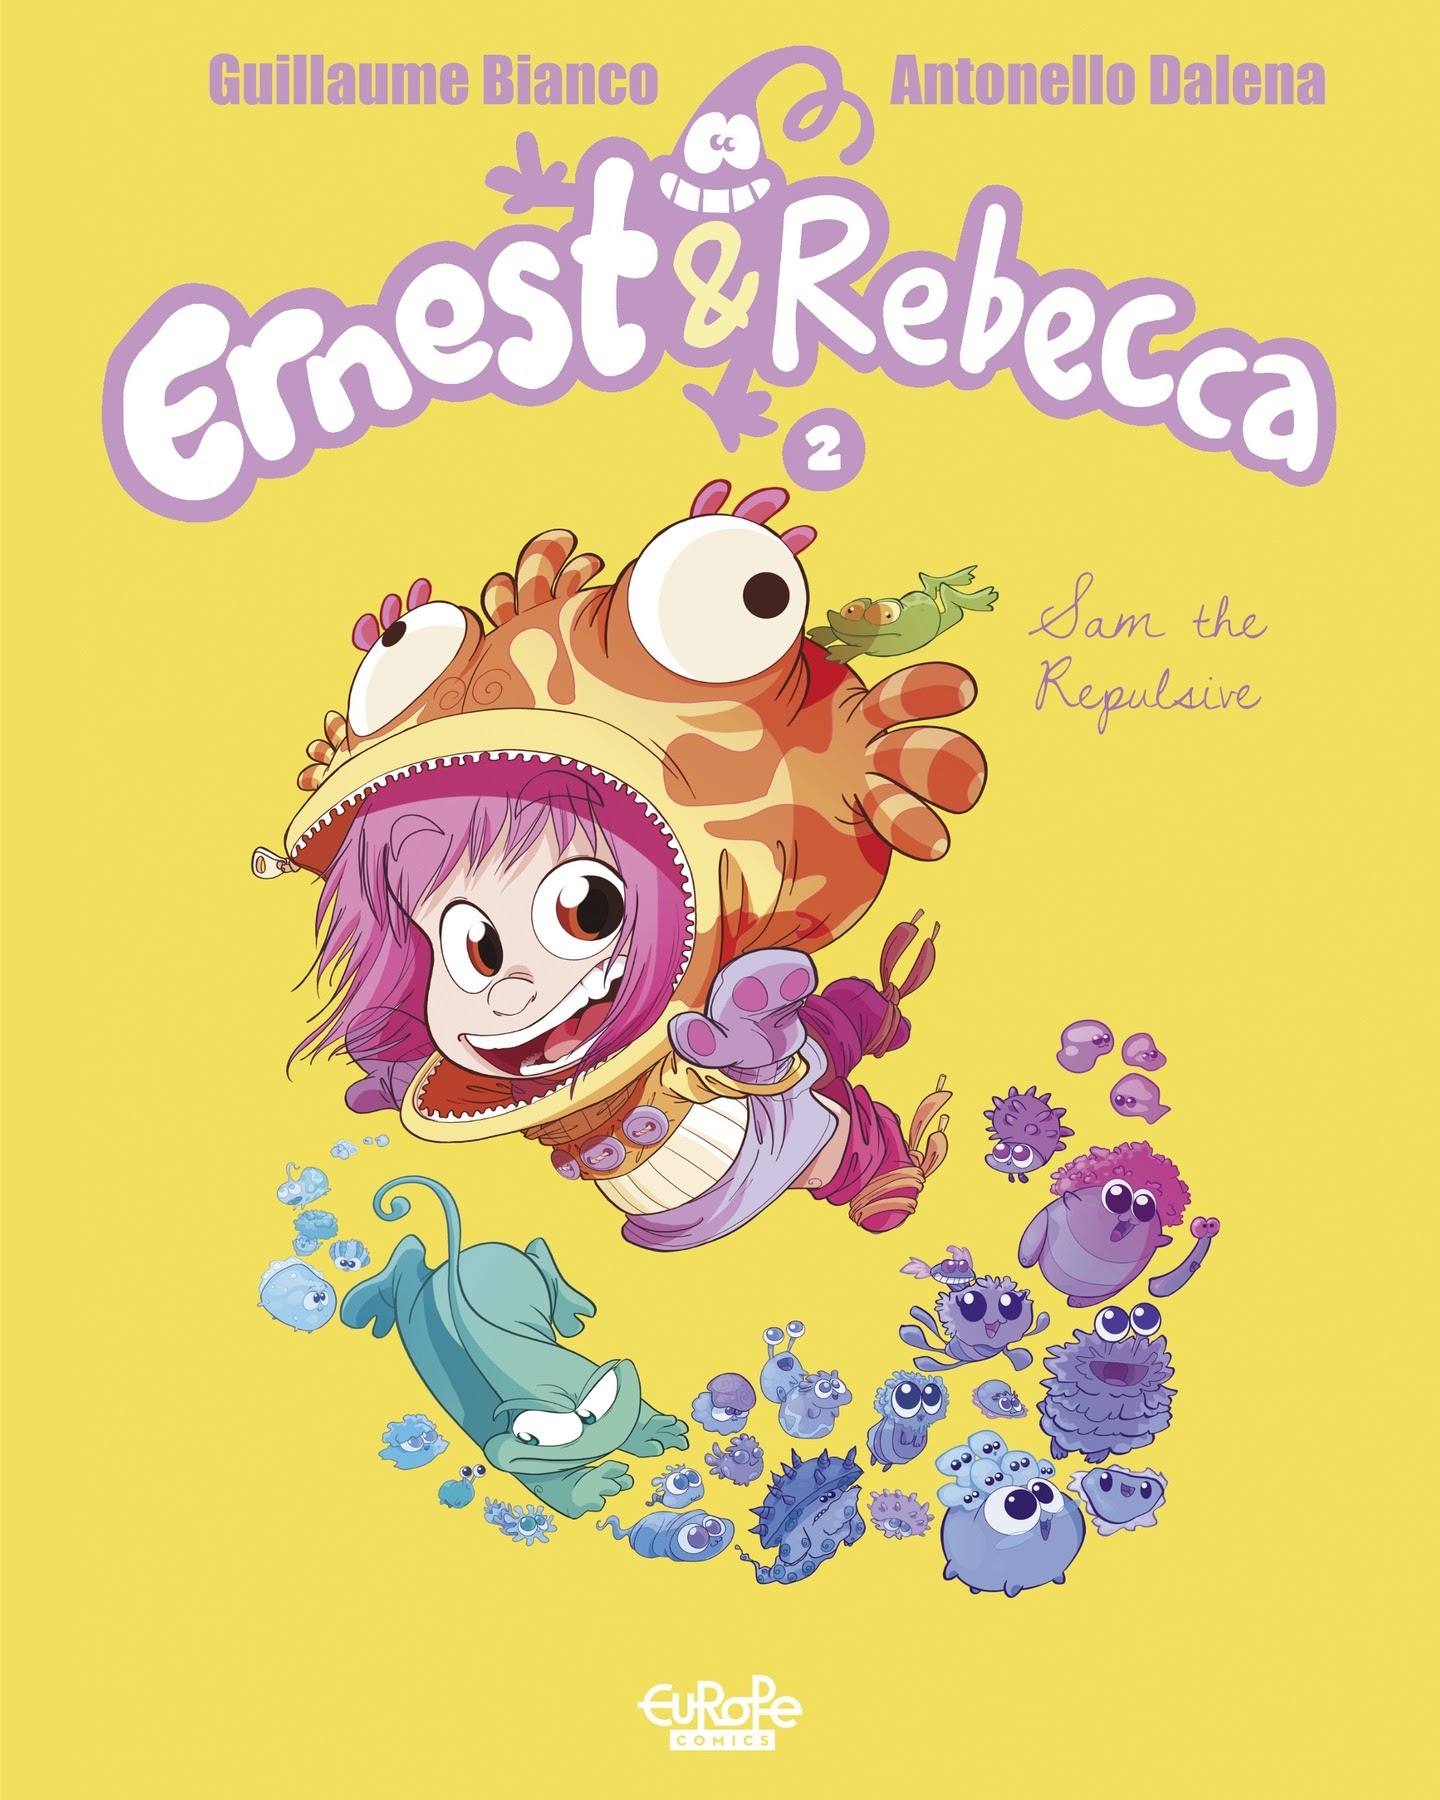 Read online Ernest & Rebecca comic -  Issue #2 - 1